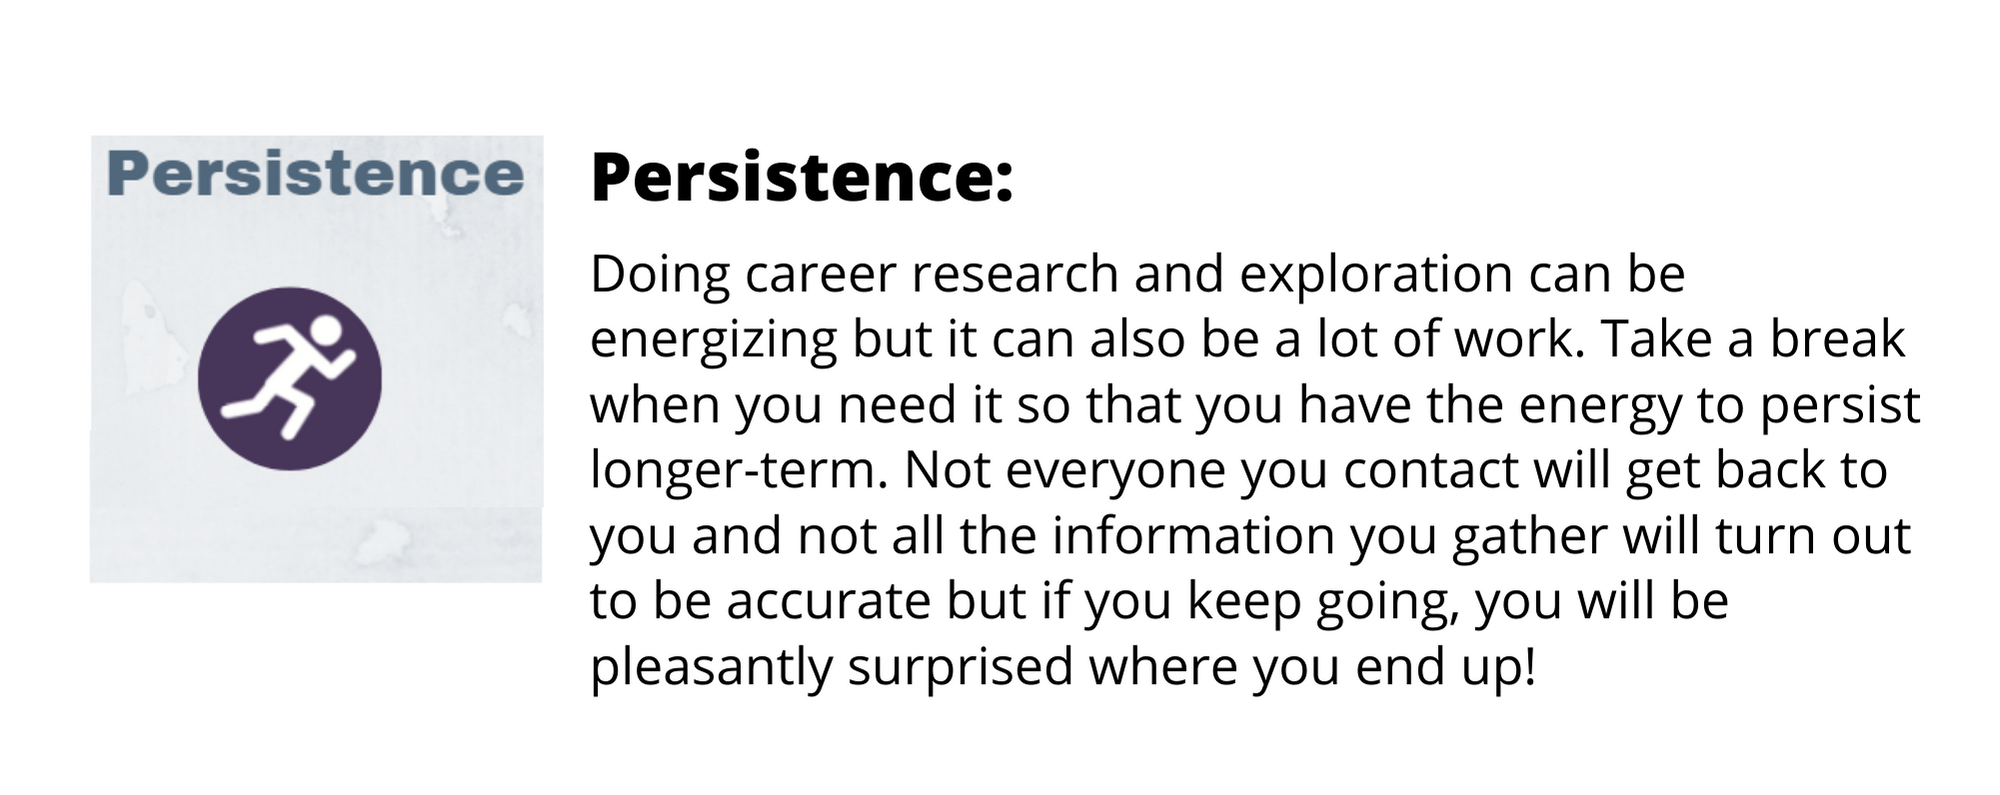 Doing career research and exploration can be energizing but it can also be a lot of work. Take a break when you need it so that you have the energy to persist longer-term. Not everyone you contact will get back to you and not all the information you gather will turn out to be accurate but if you keep going, you will be pleasantly surprised where you end up!